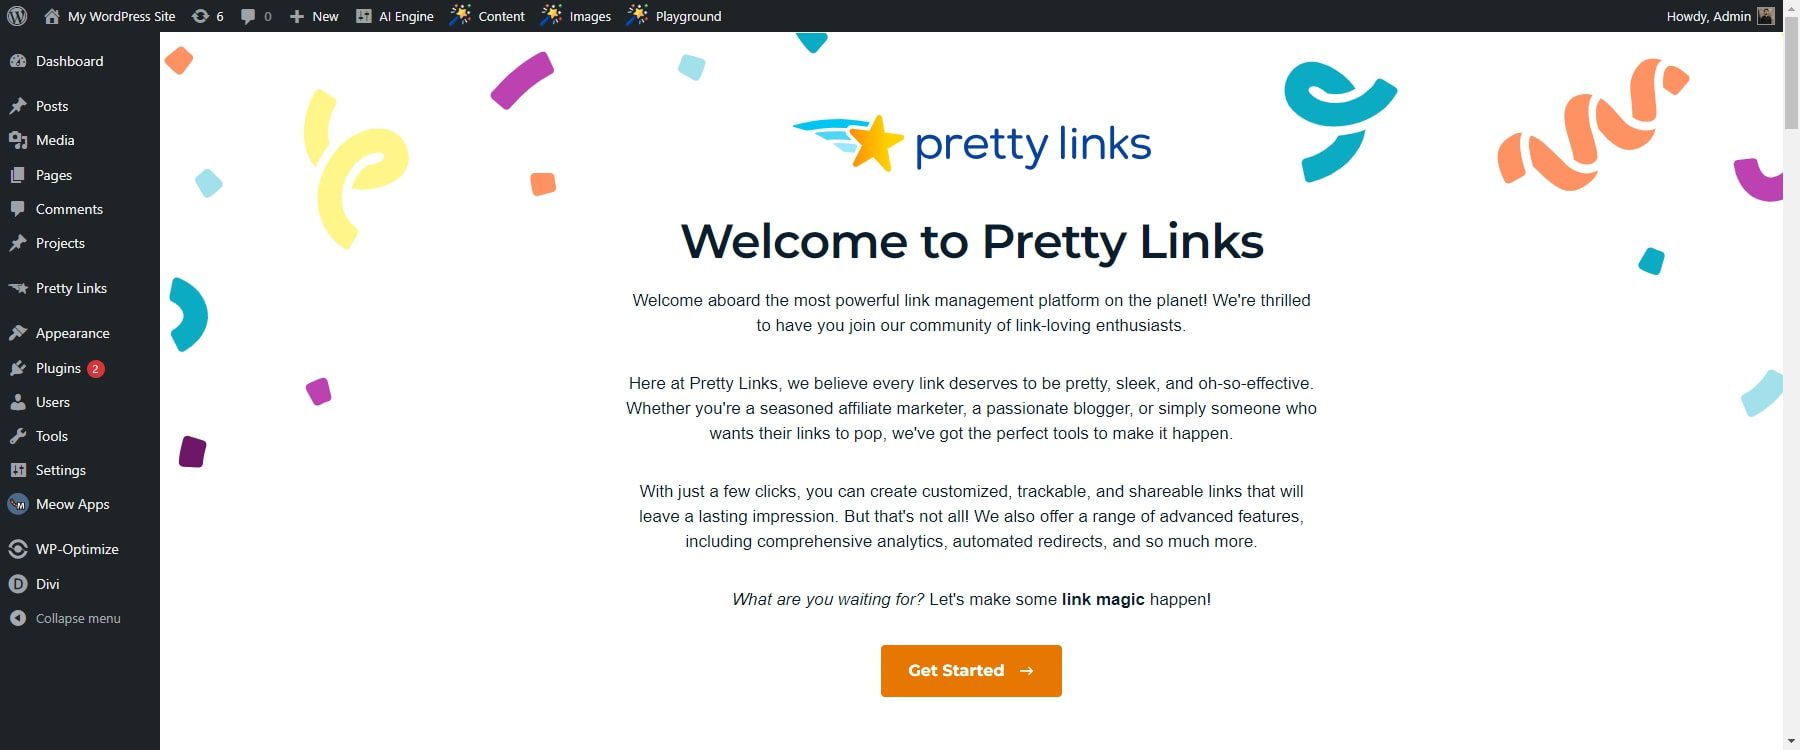 pretty links overview